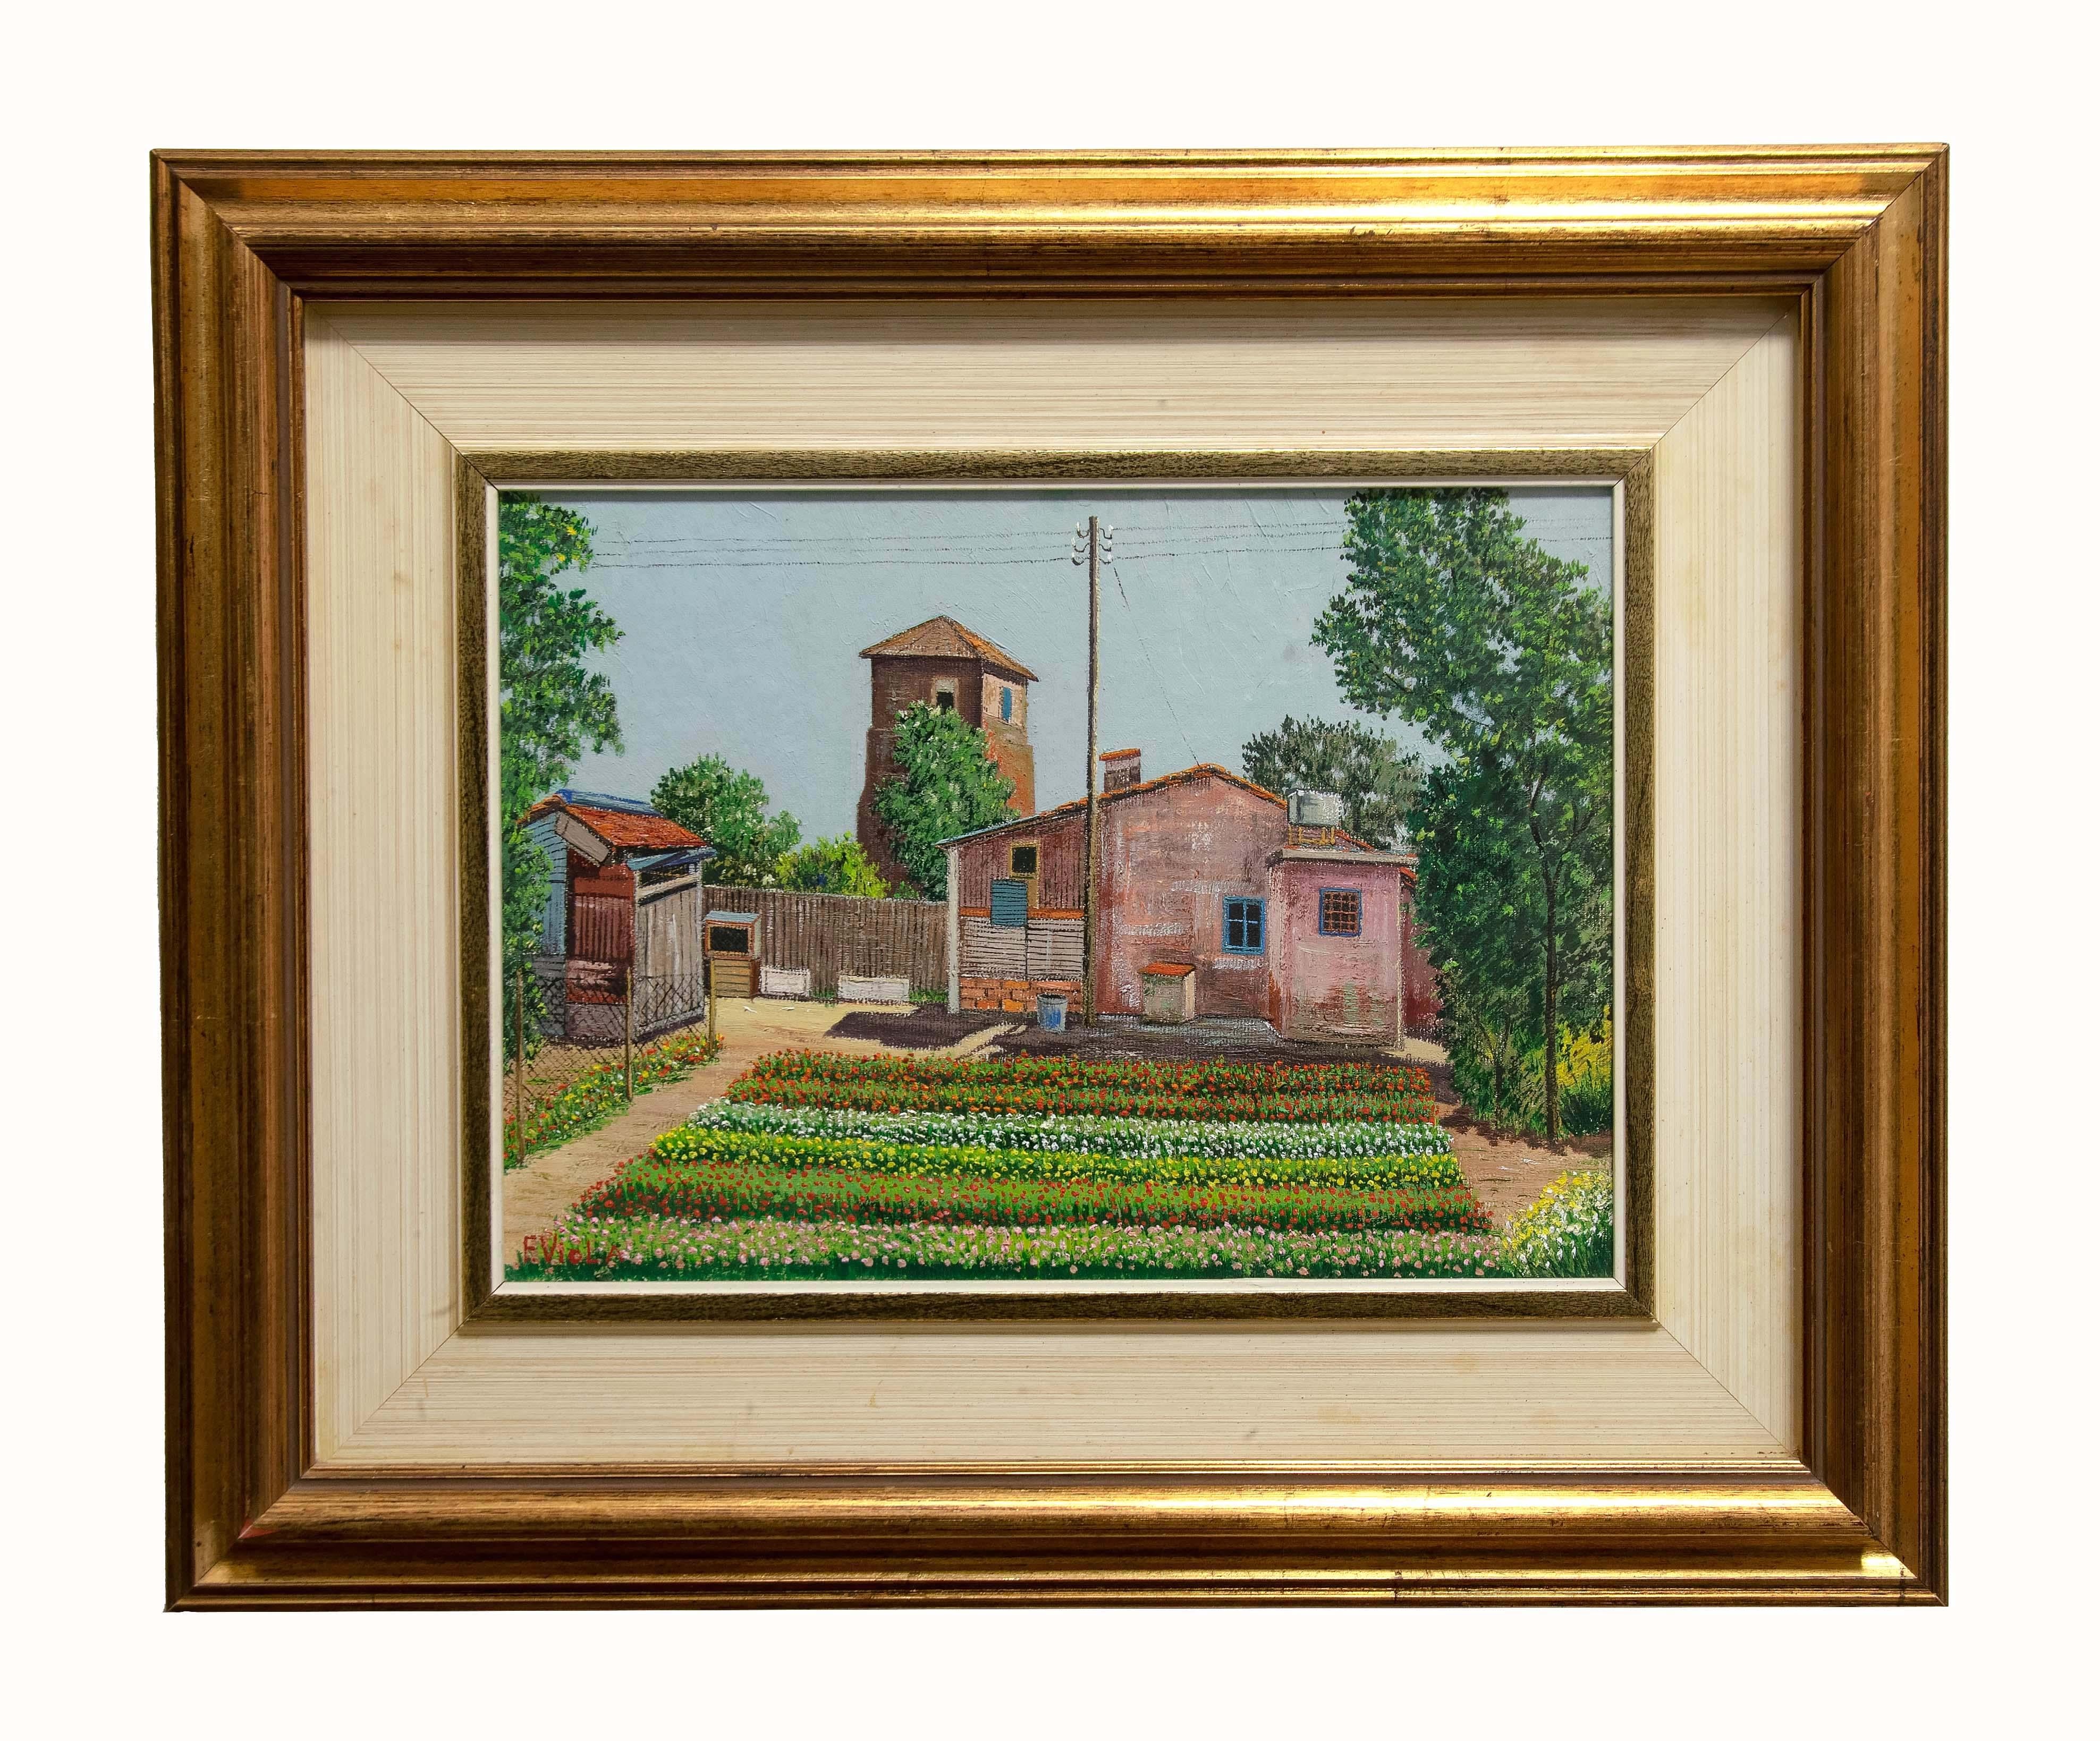 Rustic Cottage - Oil on Plywood by Franco Viola - 1980